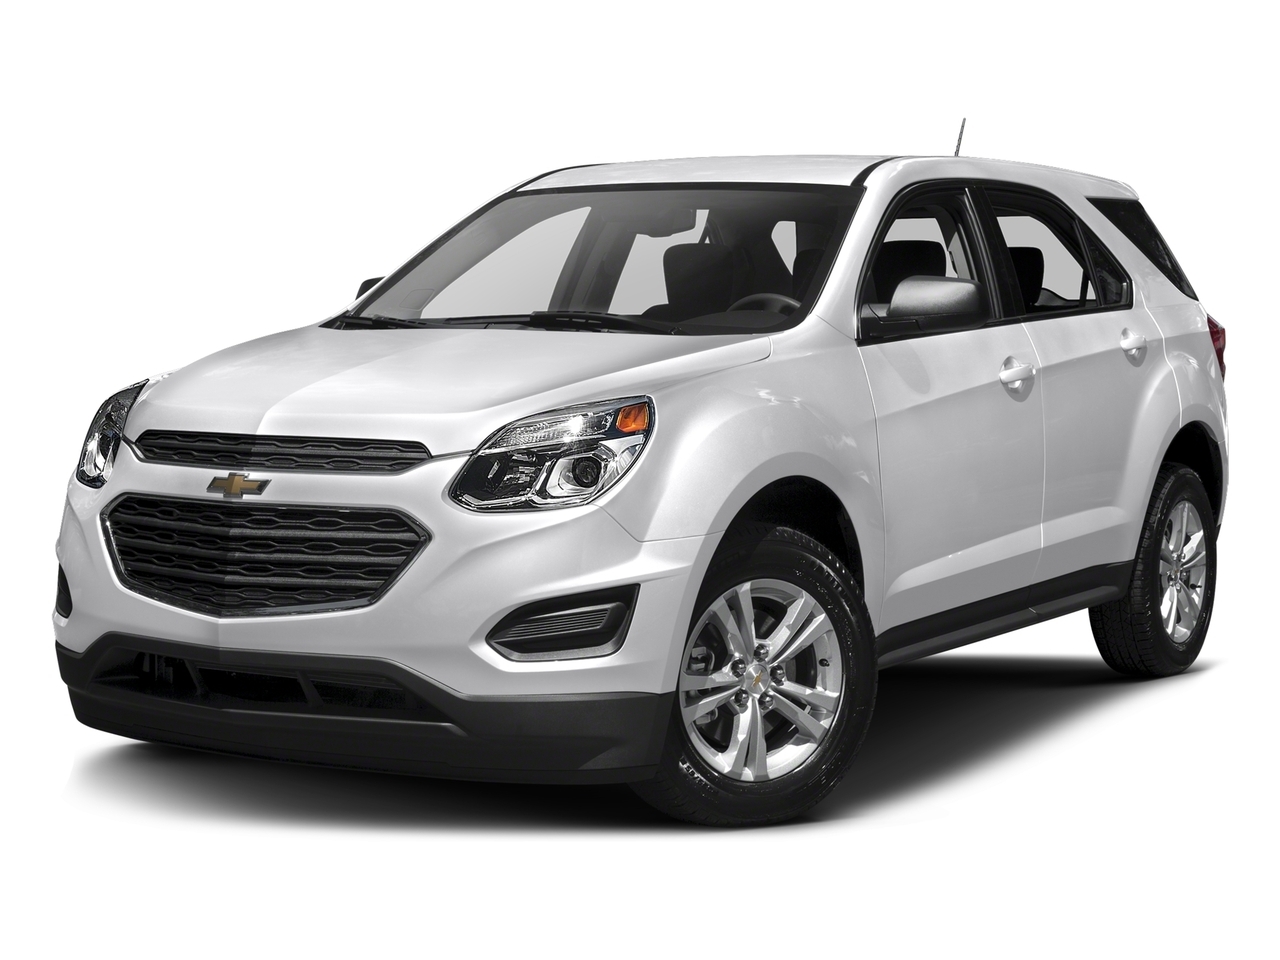 2017 Chevrolet Equinox GREAT FOR A GROWING FMAILY